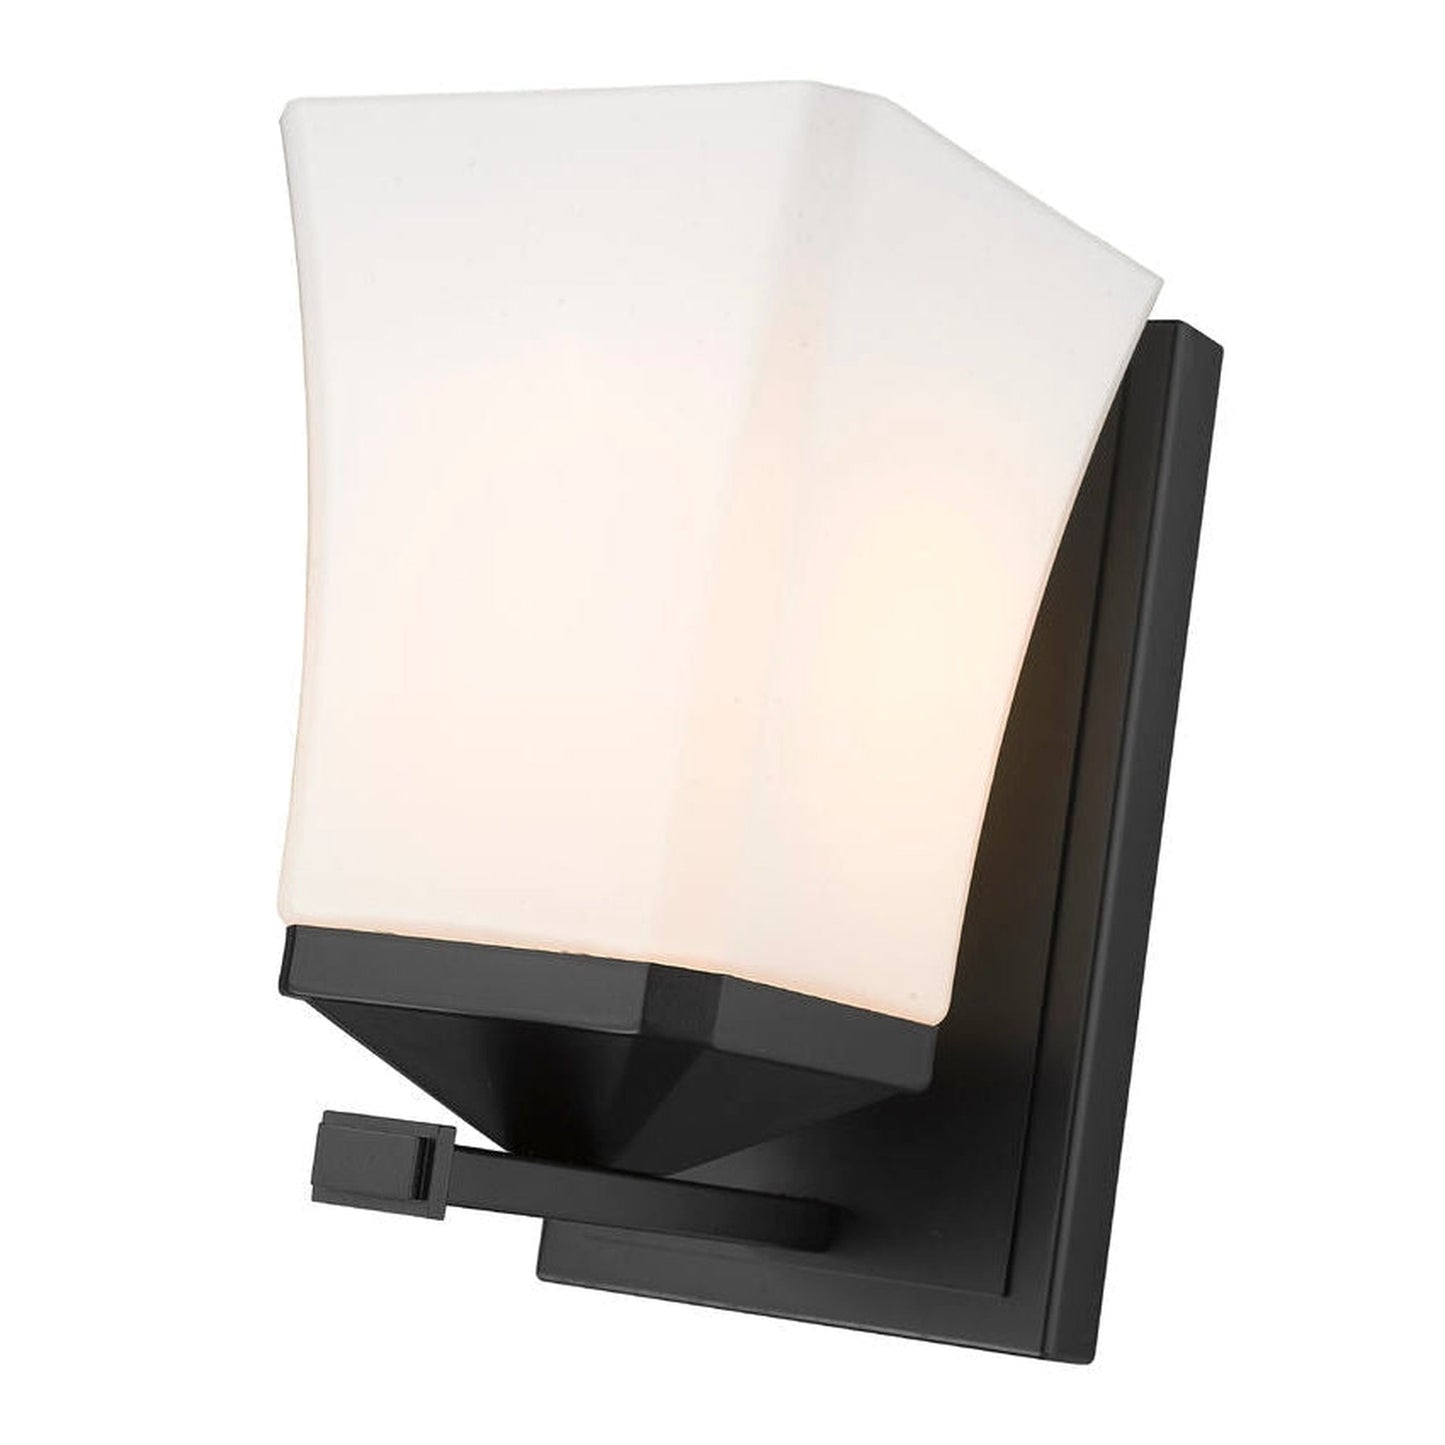 Z-Lite Darcy 5" 1-Light Matte Black Wall Sconce With Etched Opal Glass Shade